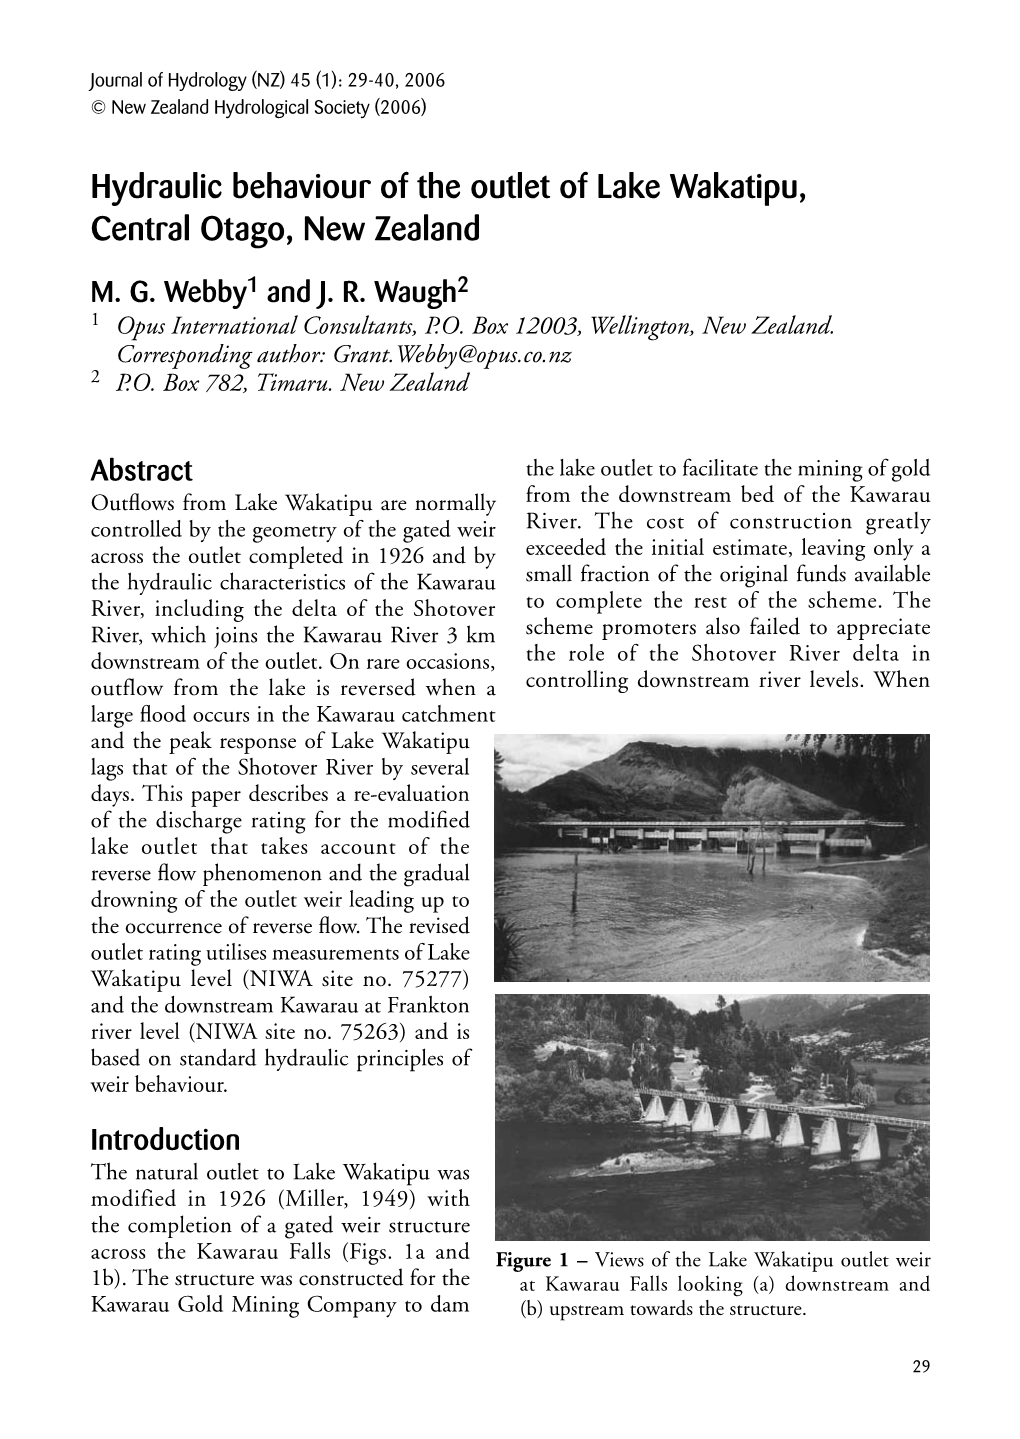 Hydraulic Behaviour of the Outlet of Lake Wakatipu, Central Otago, New Zealand